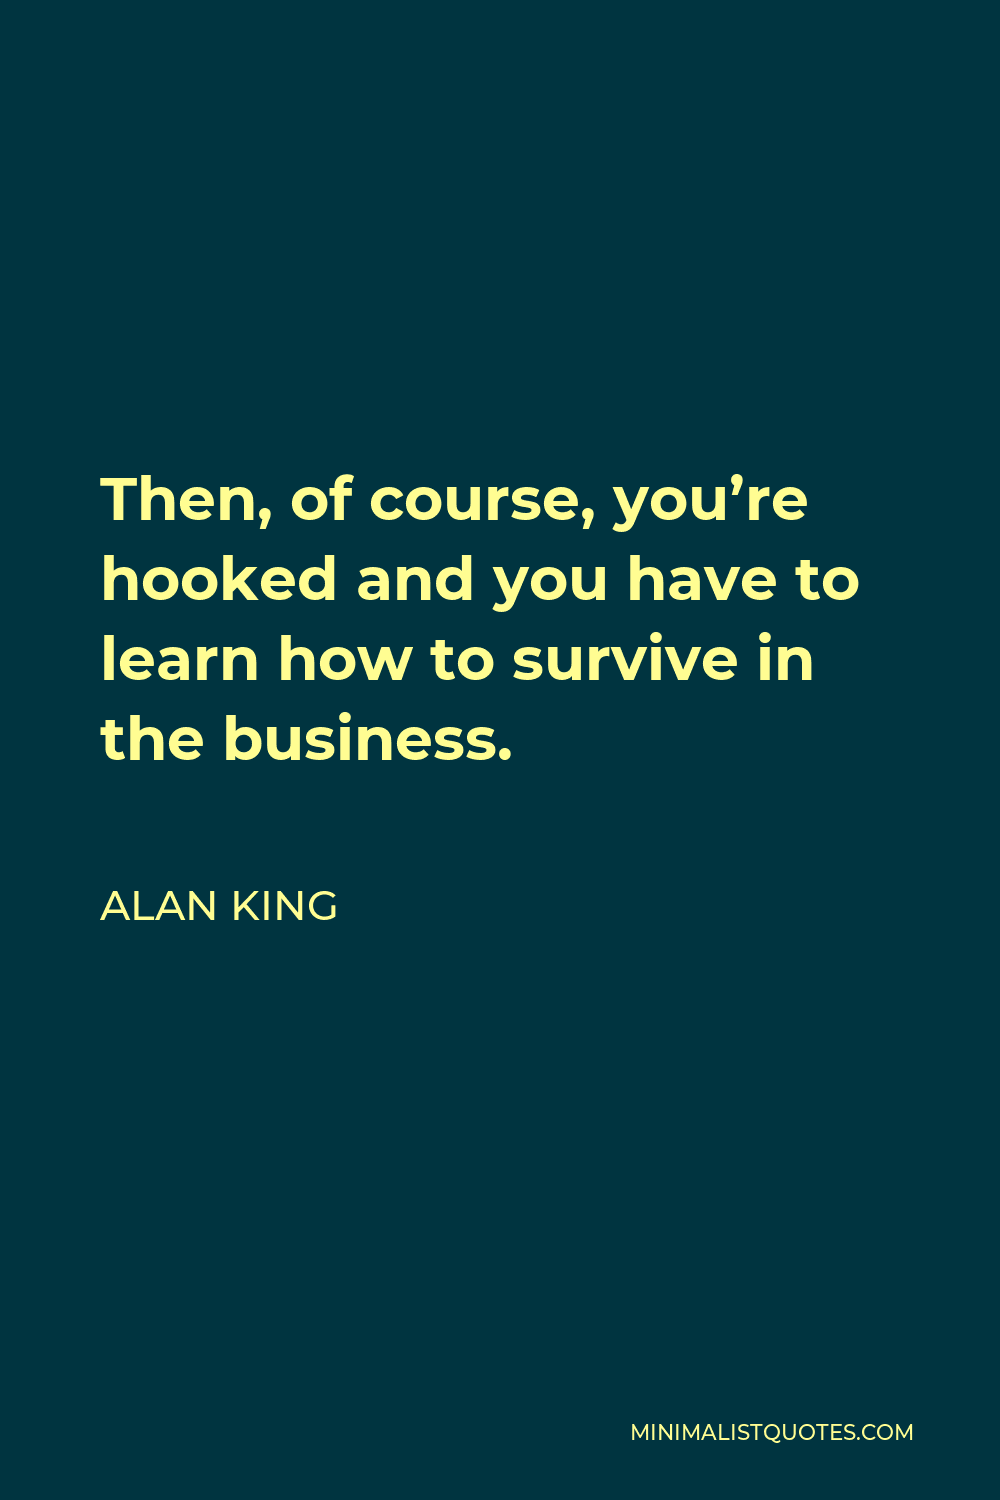 Alan King Quote - Then, of course, you’re hooked and you have to learn how to survive in the business.